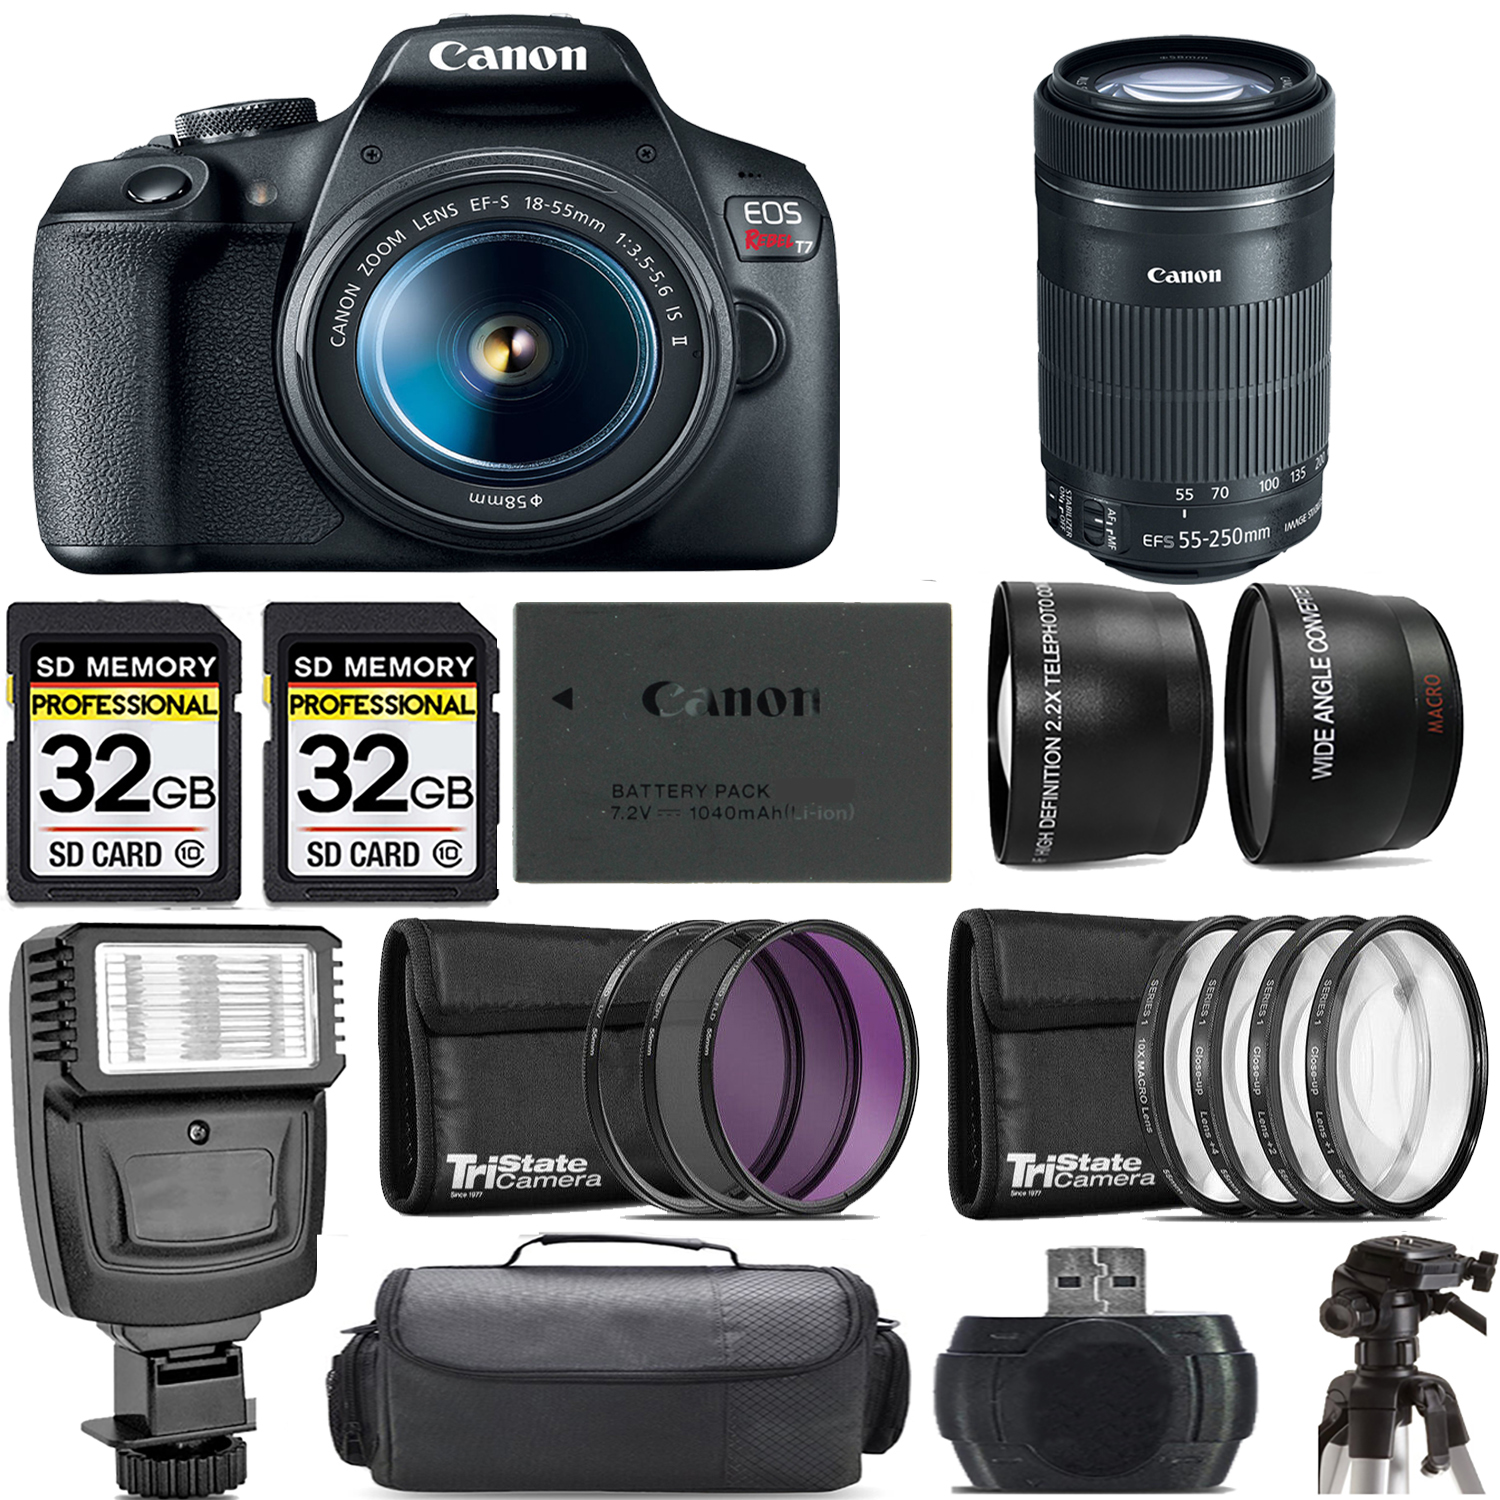 EOS Rebel T7 with 18-55mm Lens + 55-250mm f/4-5.6 IS STM Lens + Flash - Kit *FREE SHIPPING*